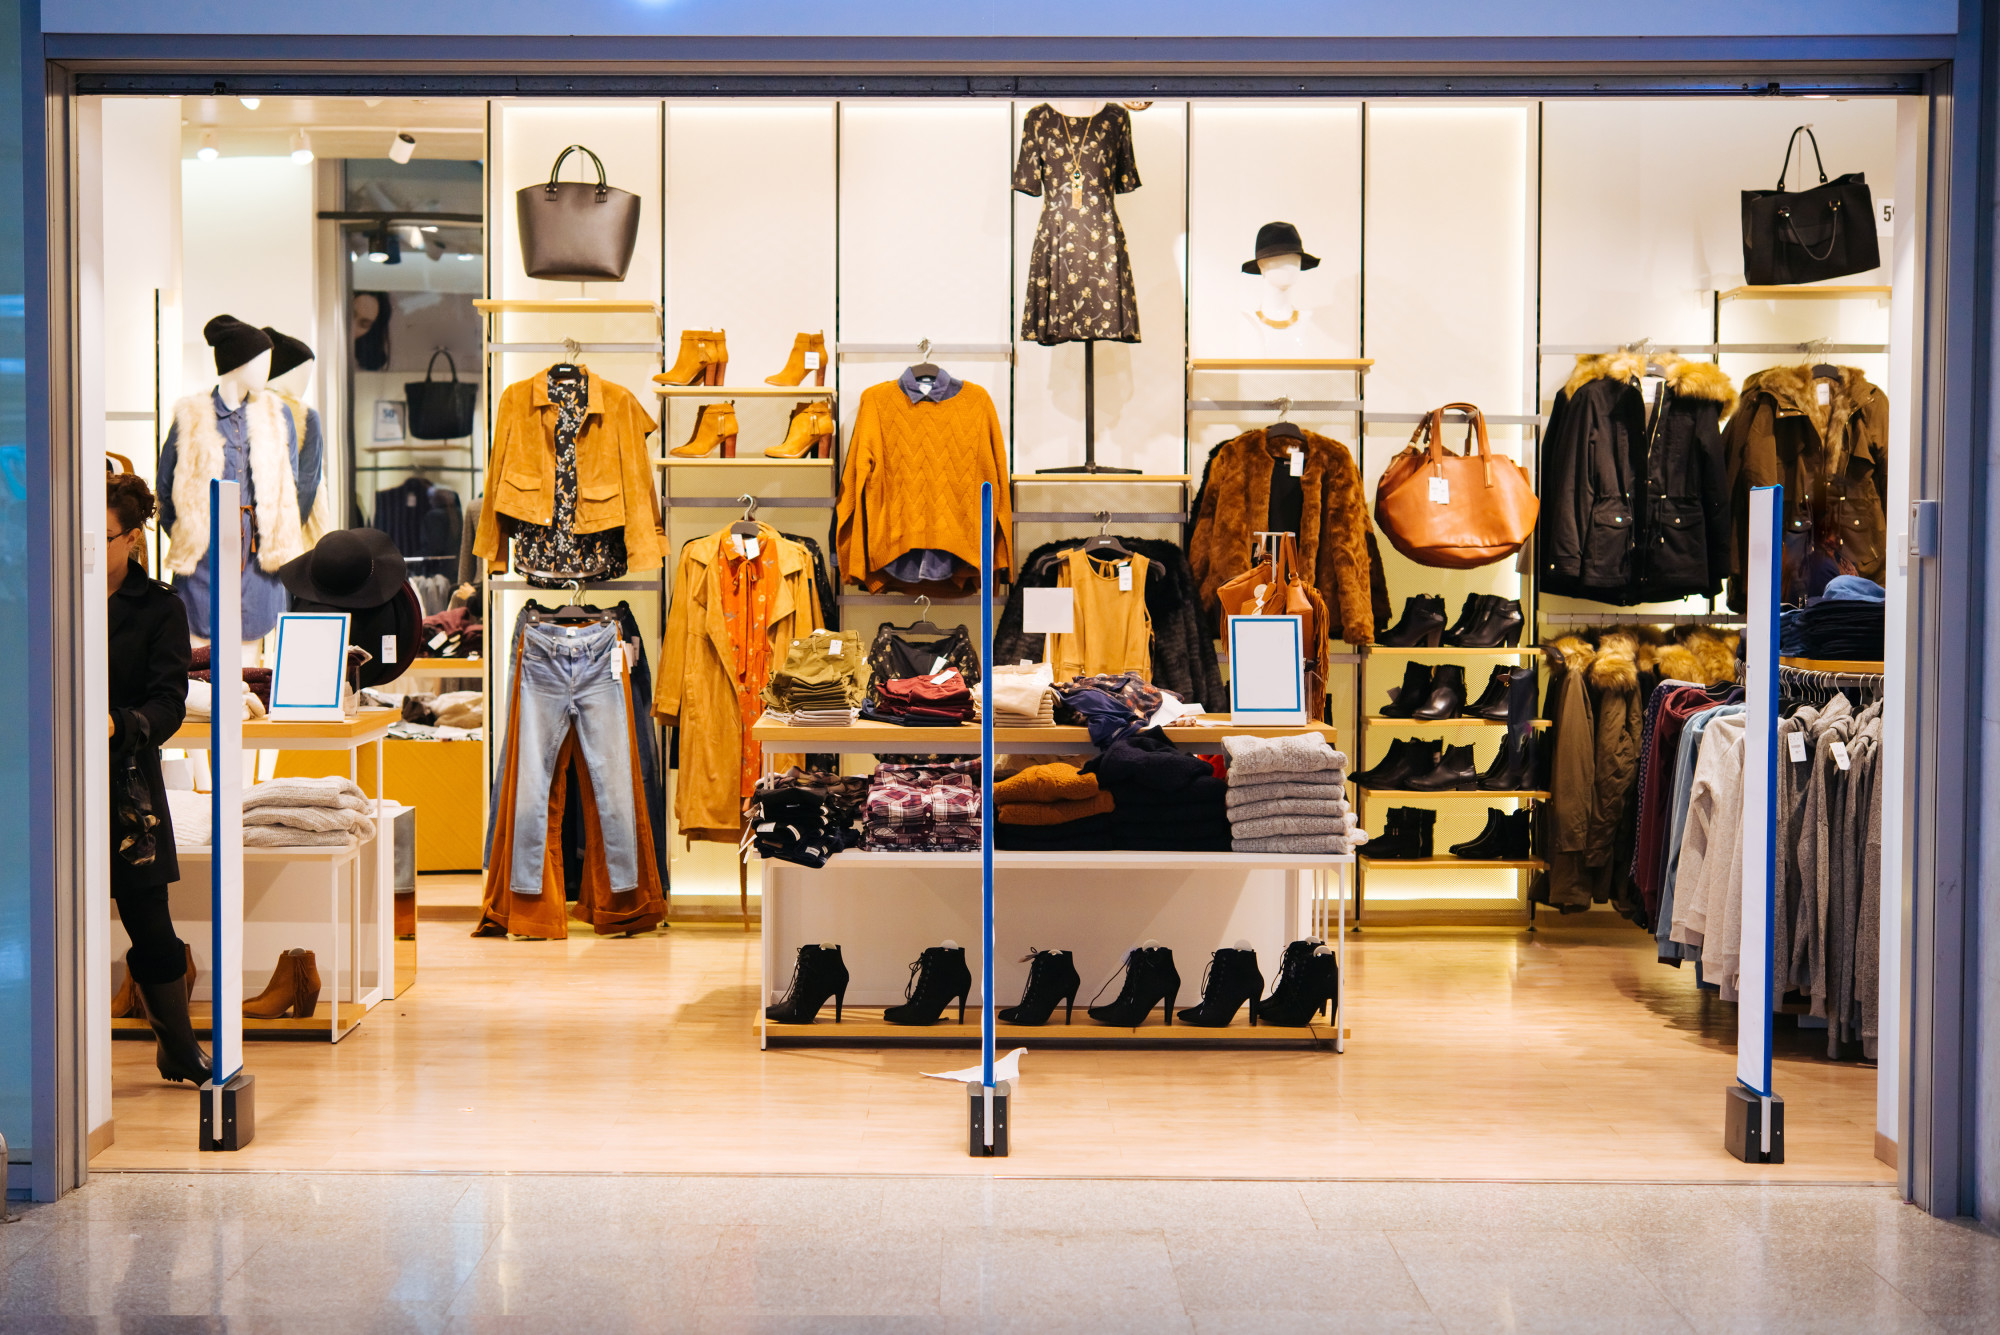 The latest retail store design ideas to attract customers AZ Big Media